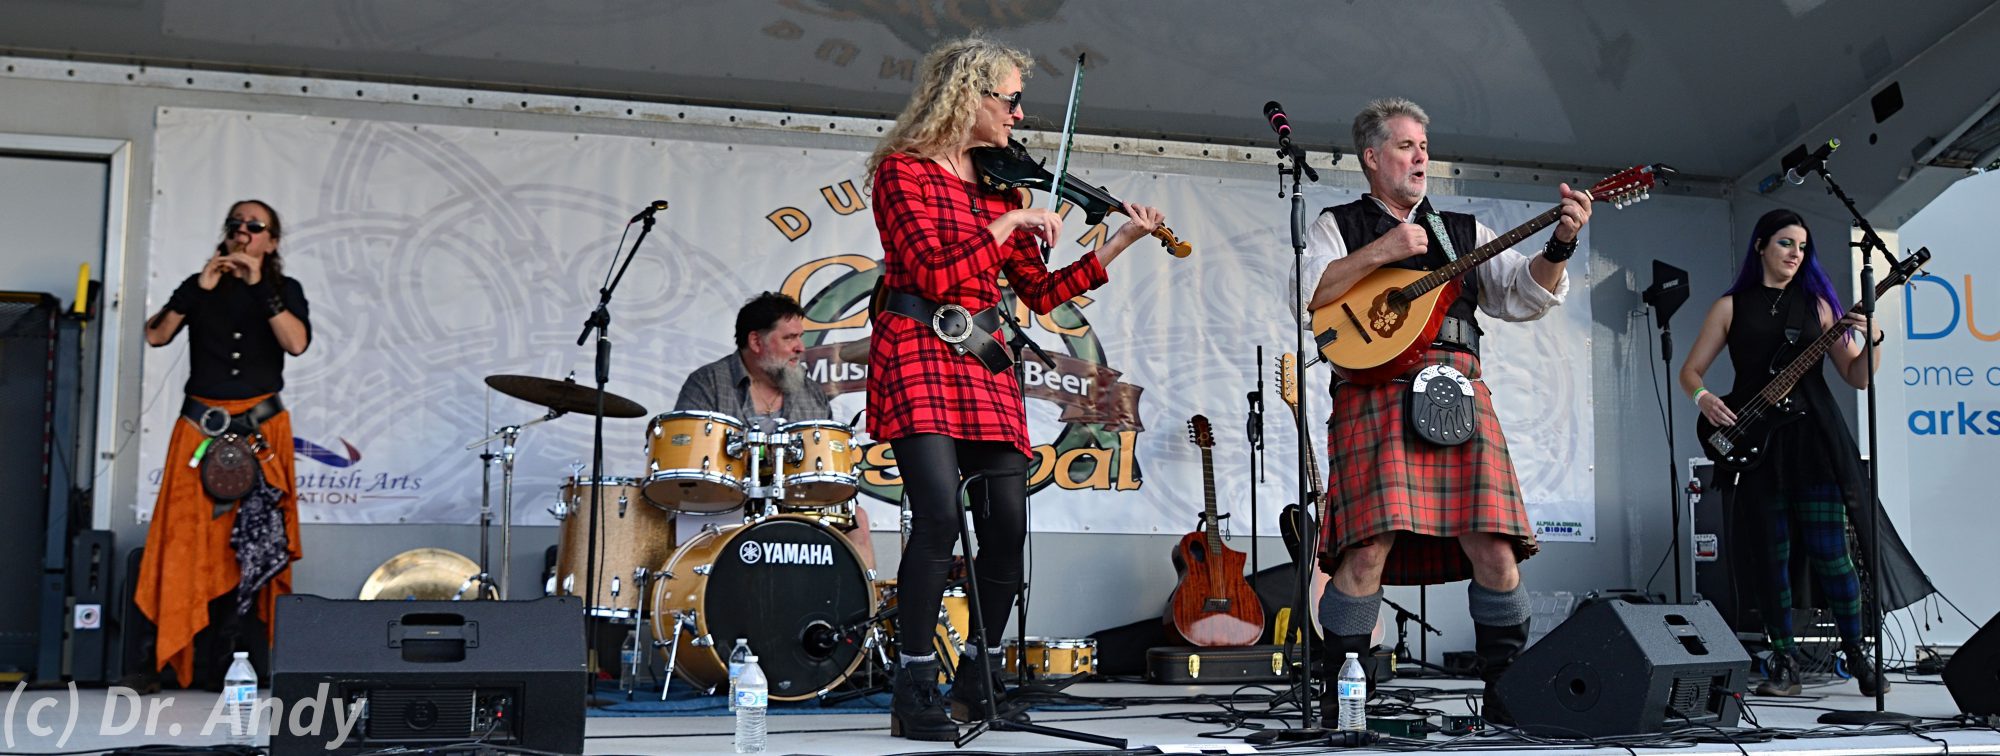 A modern Celtic music band, North of Argyll, performing on stage